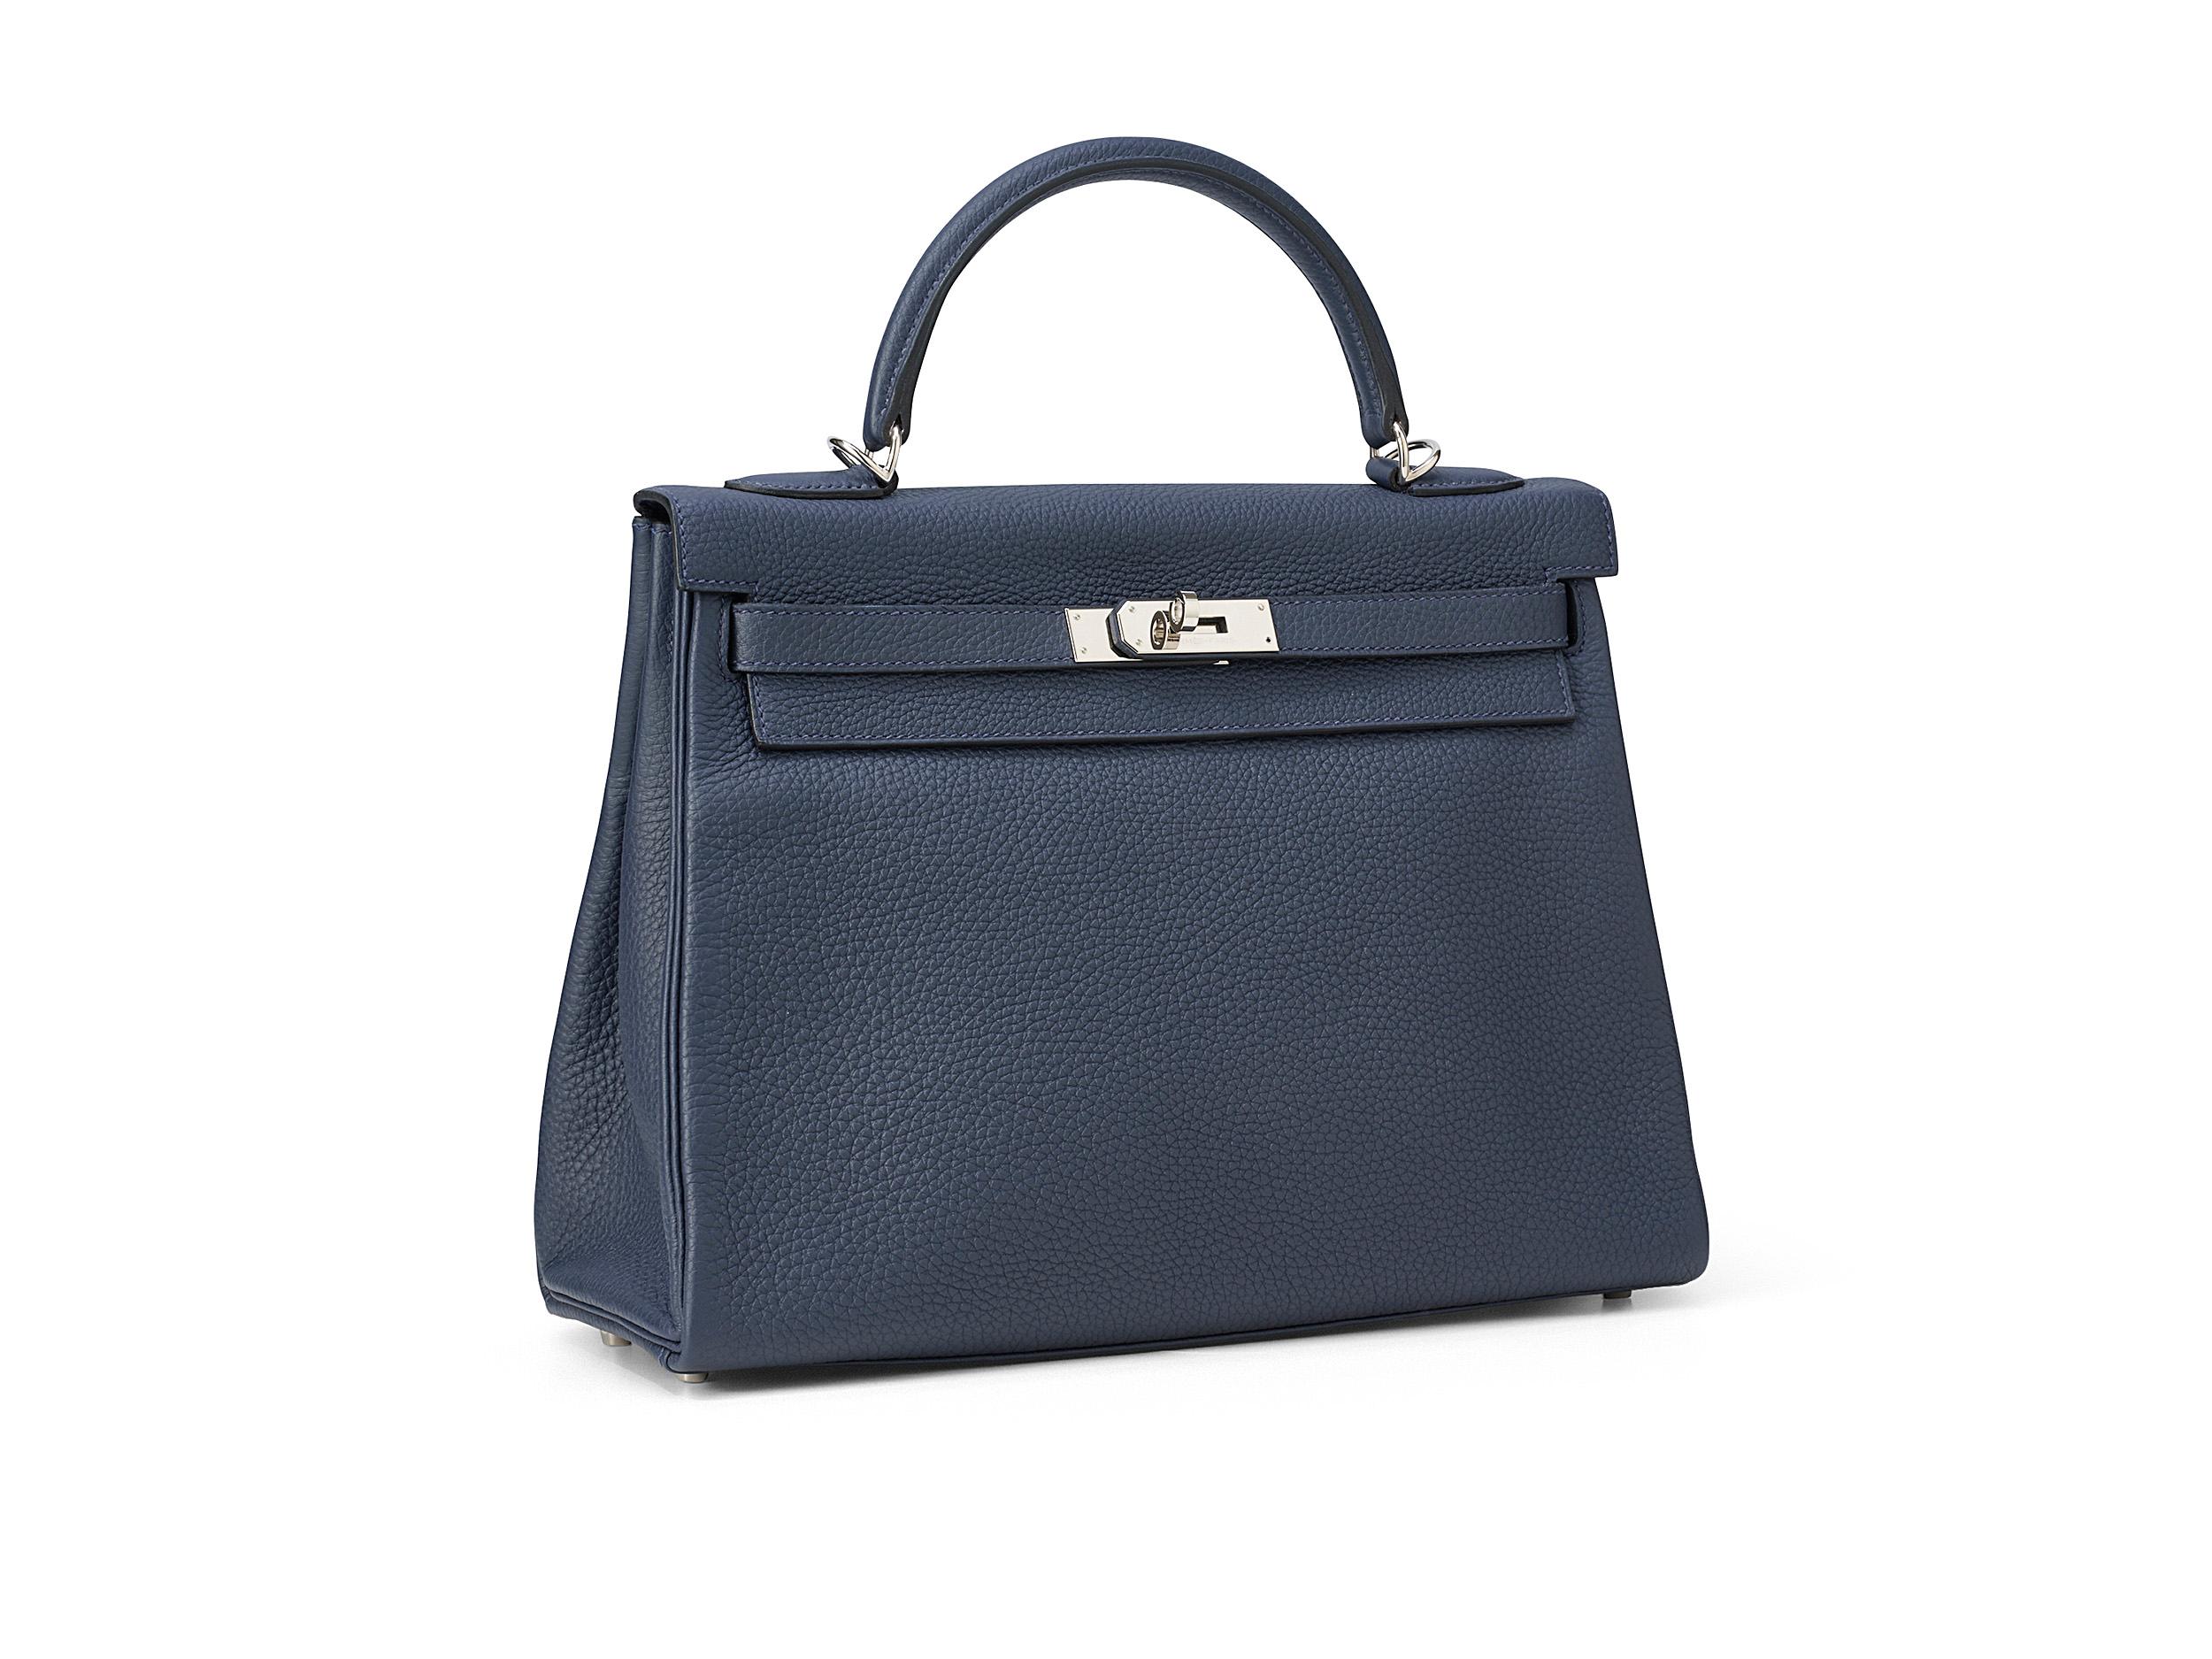 Hermès Kelly 32 in bleu nuit and togo leather with palladium hardware. The bag is in excellent condition with minor scratches on the hardware and comes as full set including the original receipt.

Stamp Y (2020) 

